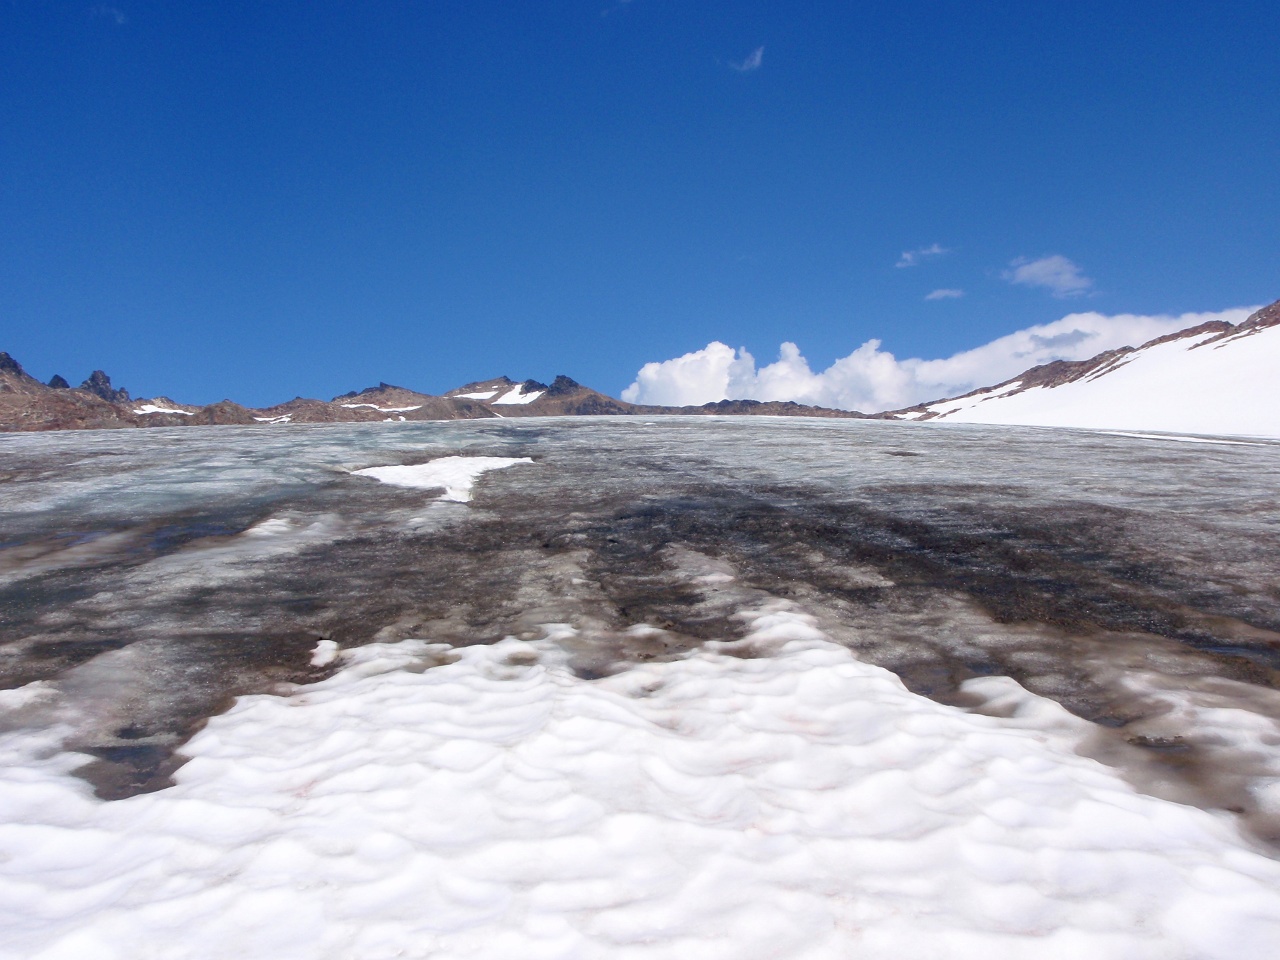 Water-covered ice on the White Chuck